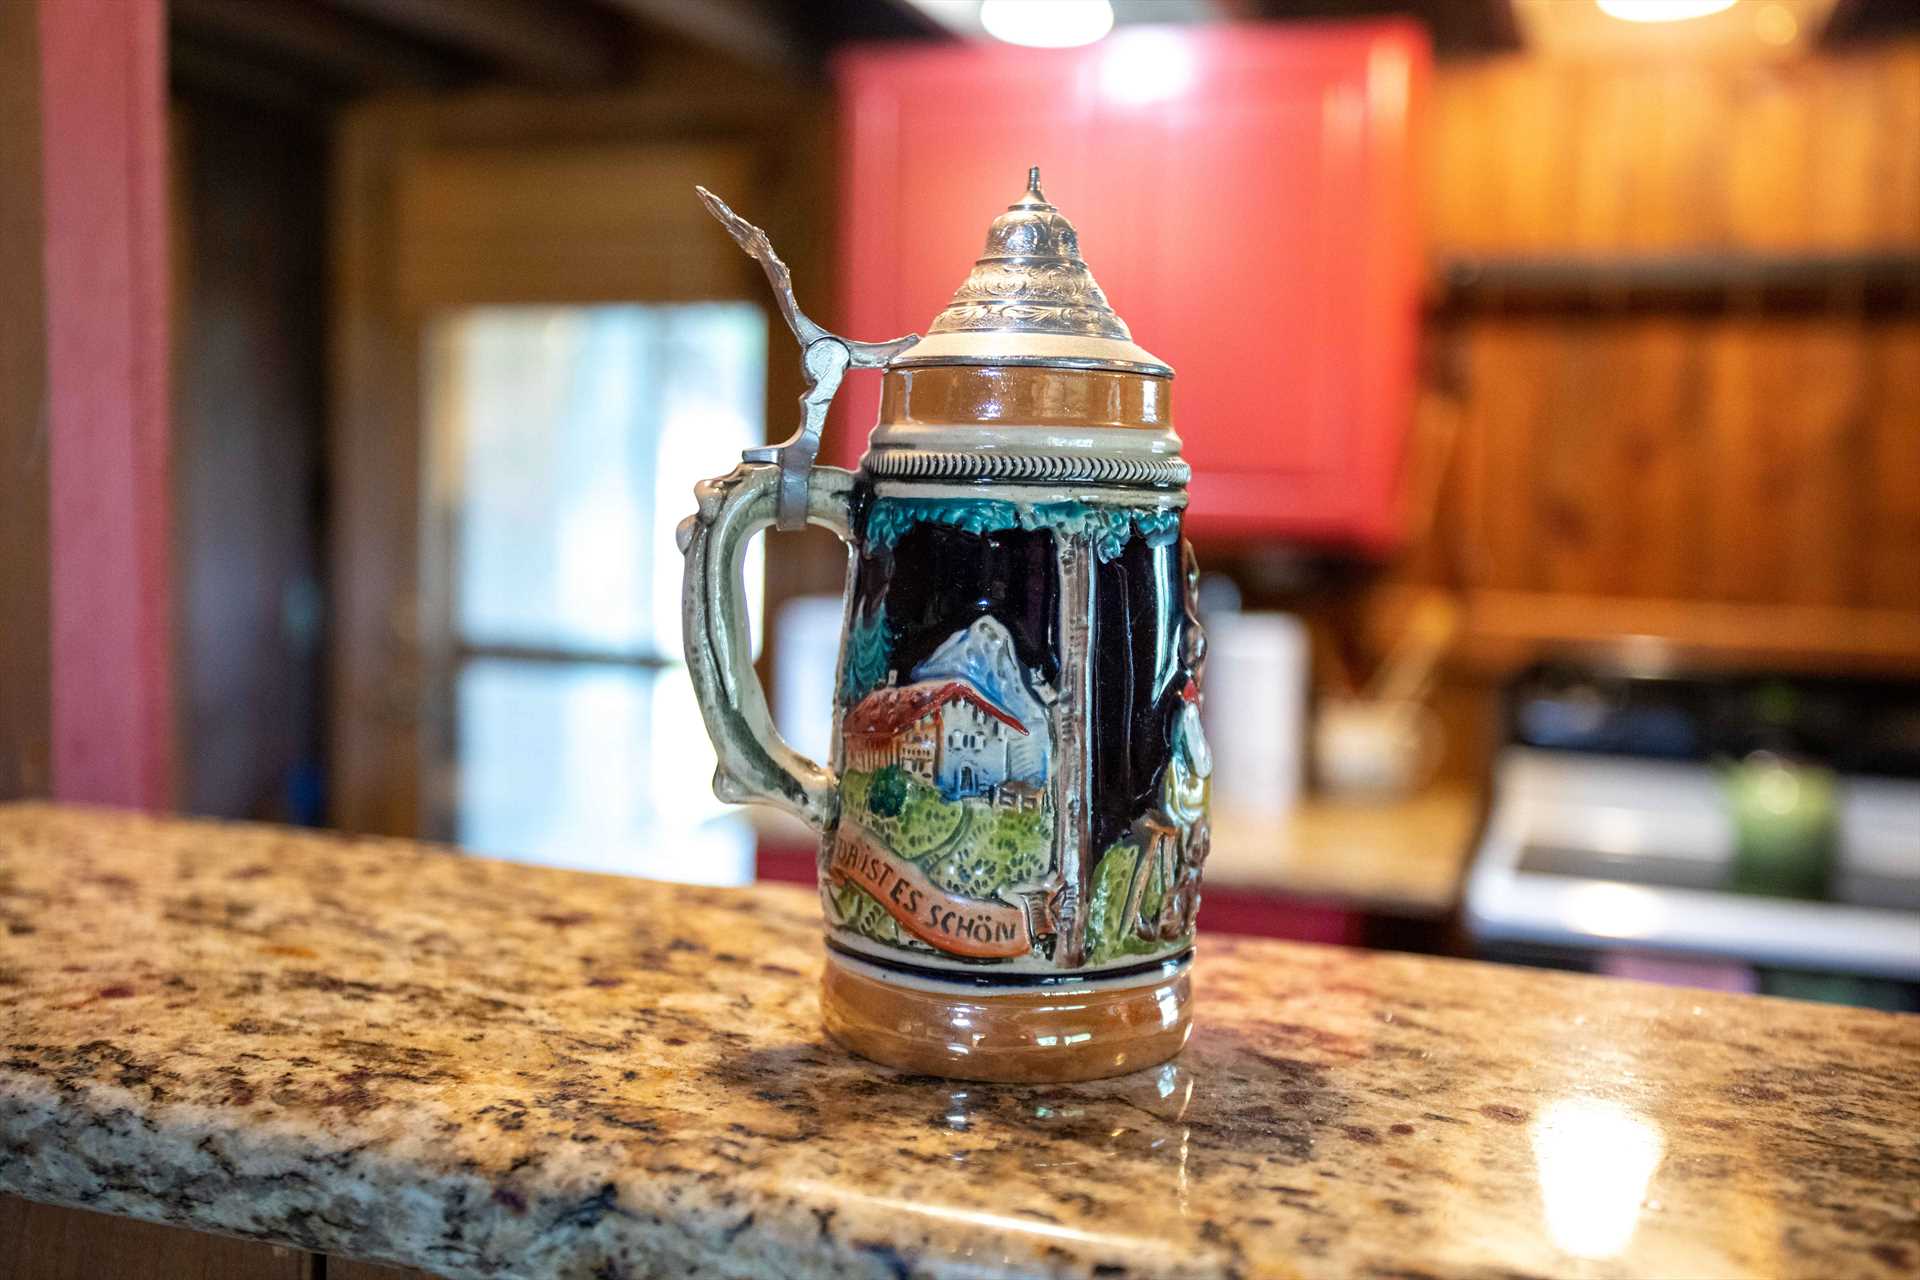                                                 The Hill Country has a rich German immigrant heritage, and it's reflected in touches like this colorful stein!